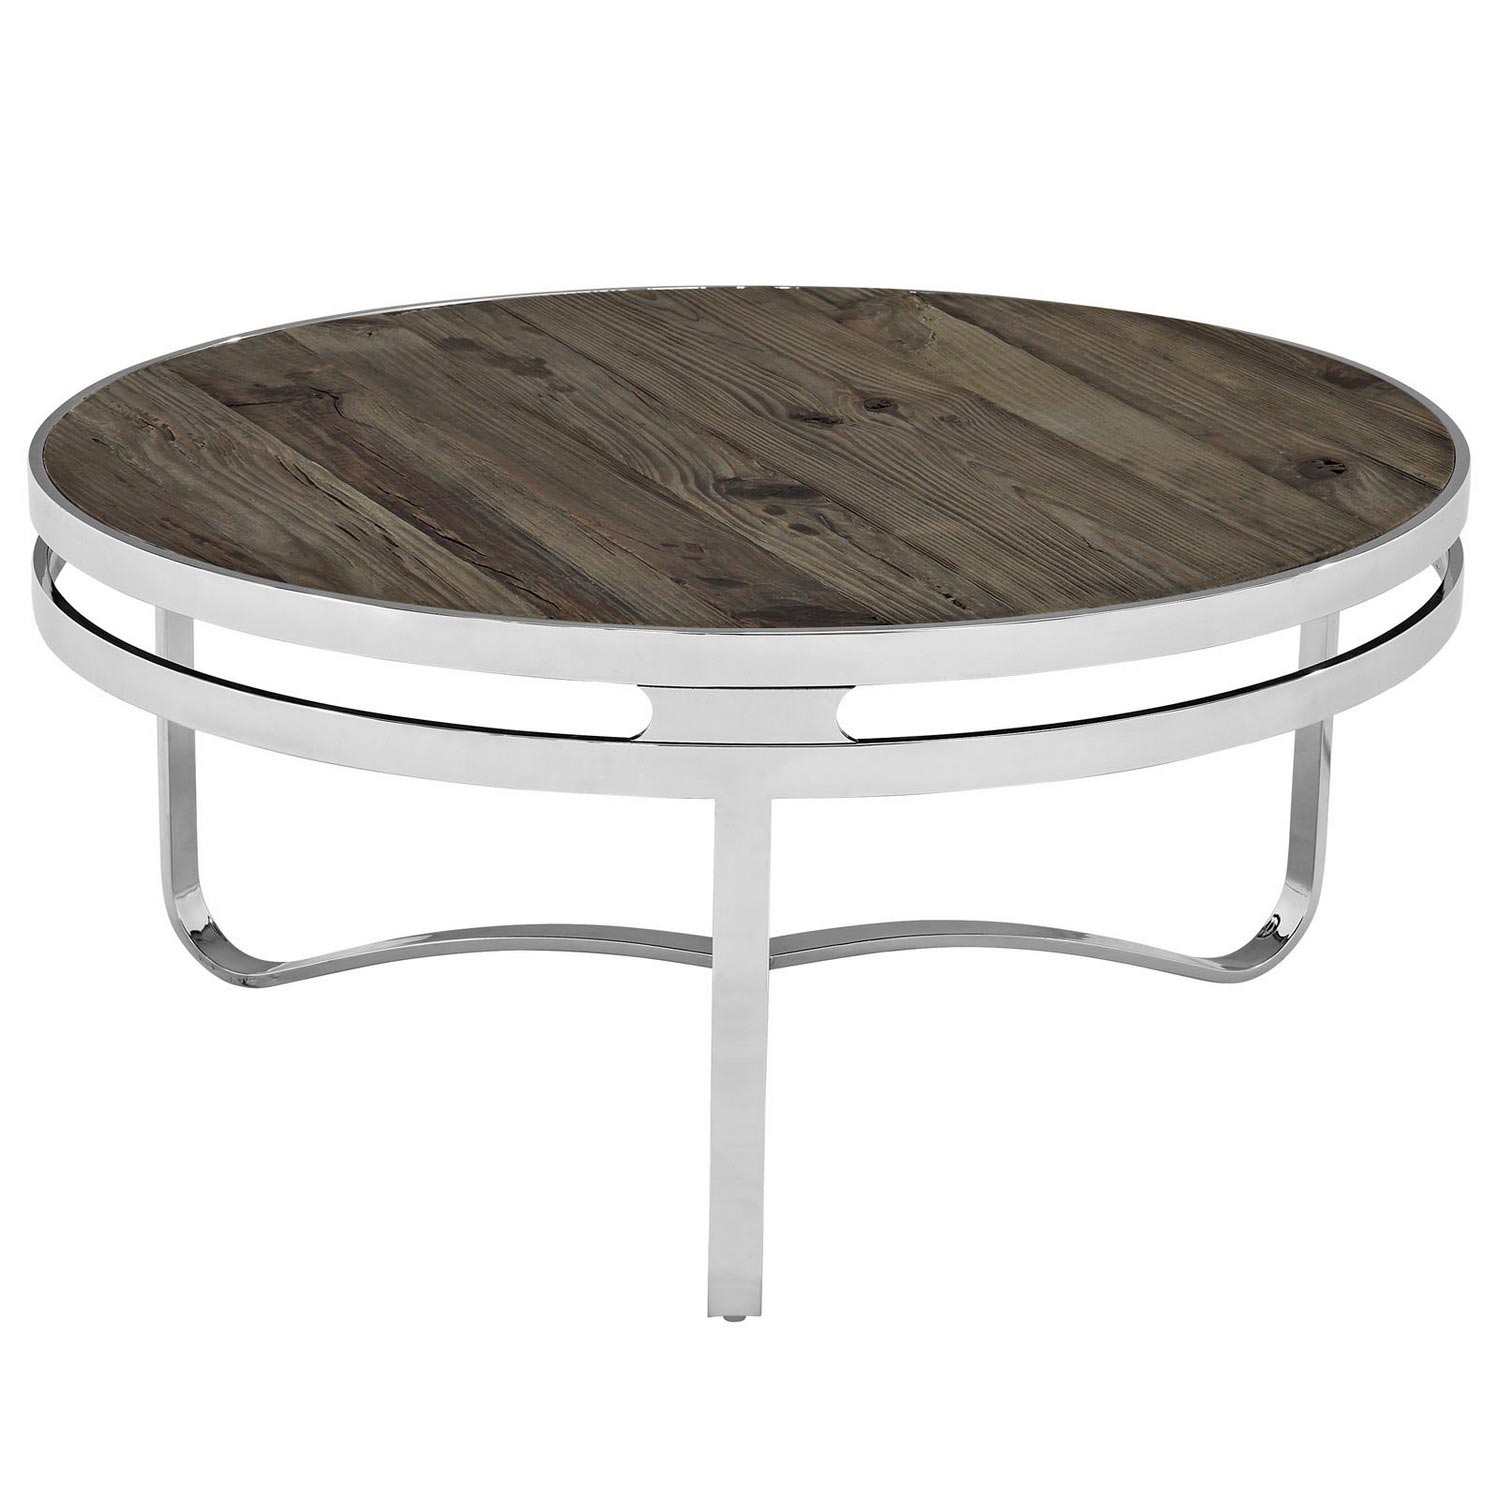 Modway Provision Wood Top Coffee Table - Brown